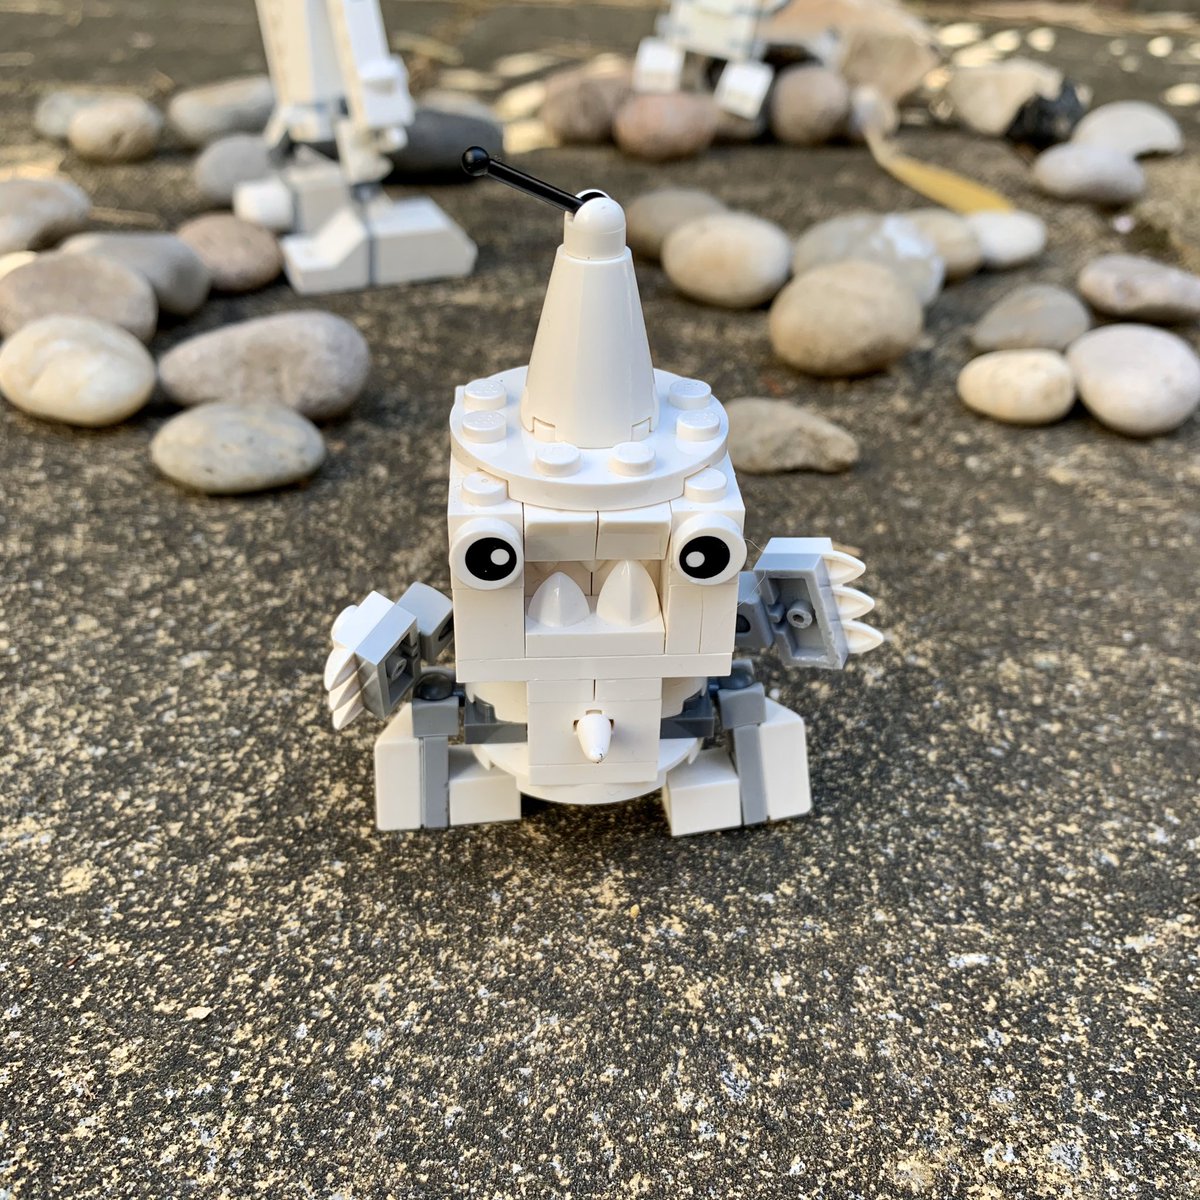 #NHMLEGO “I really want @LEGO_Group to bring back Mixels so I’ve made them look like Mixels. These life forms are icy monsters that eat ice and swim in even the coldest temperatures.” Baxter, 8yrs old